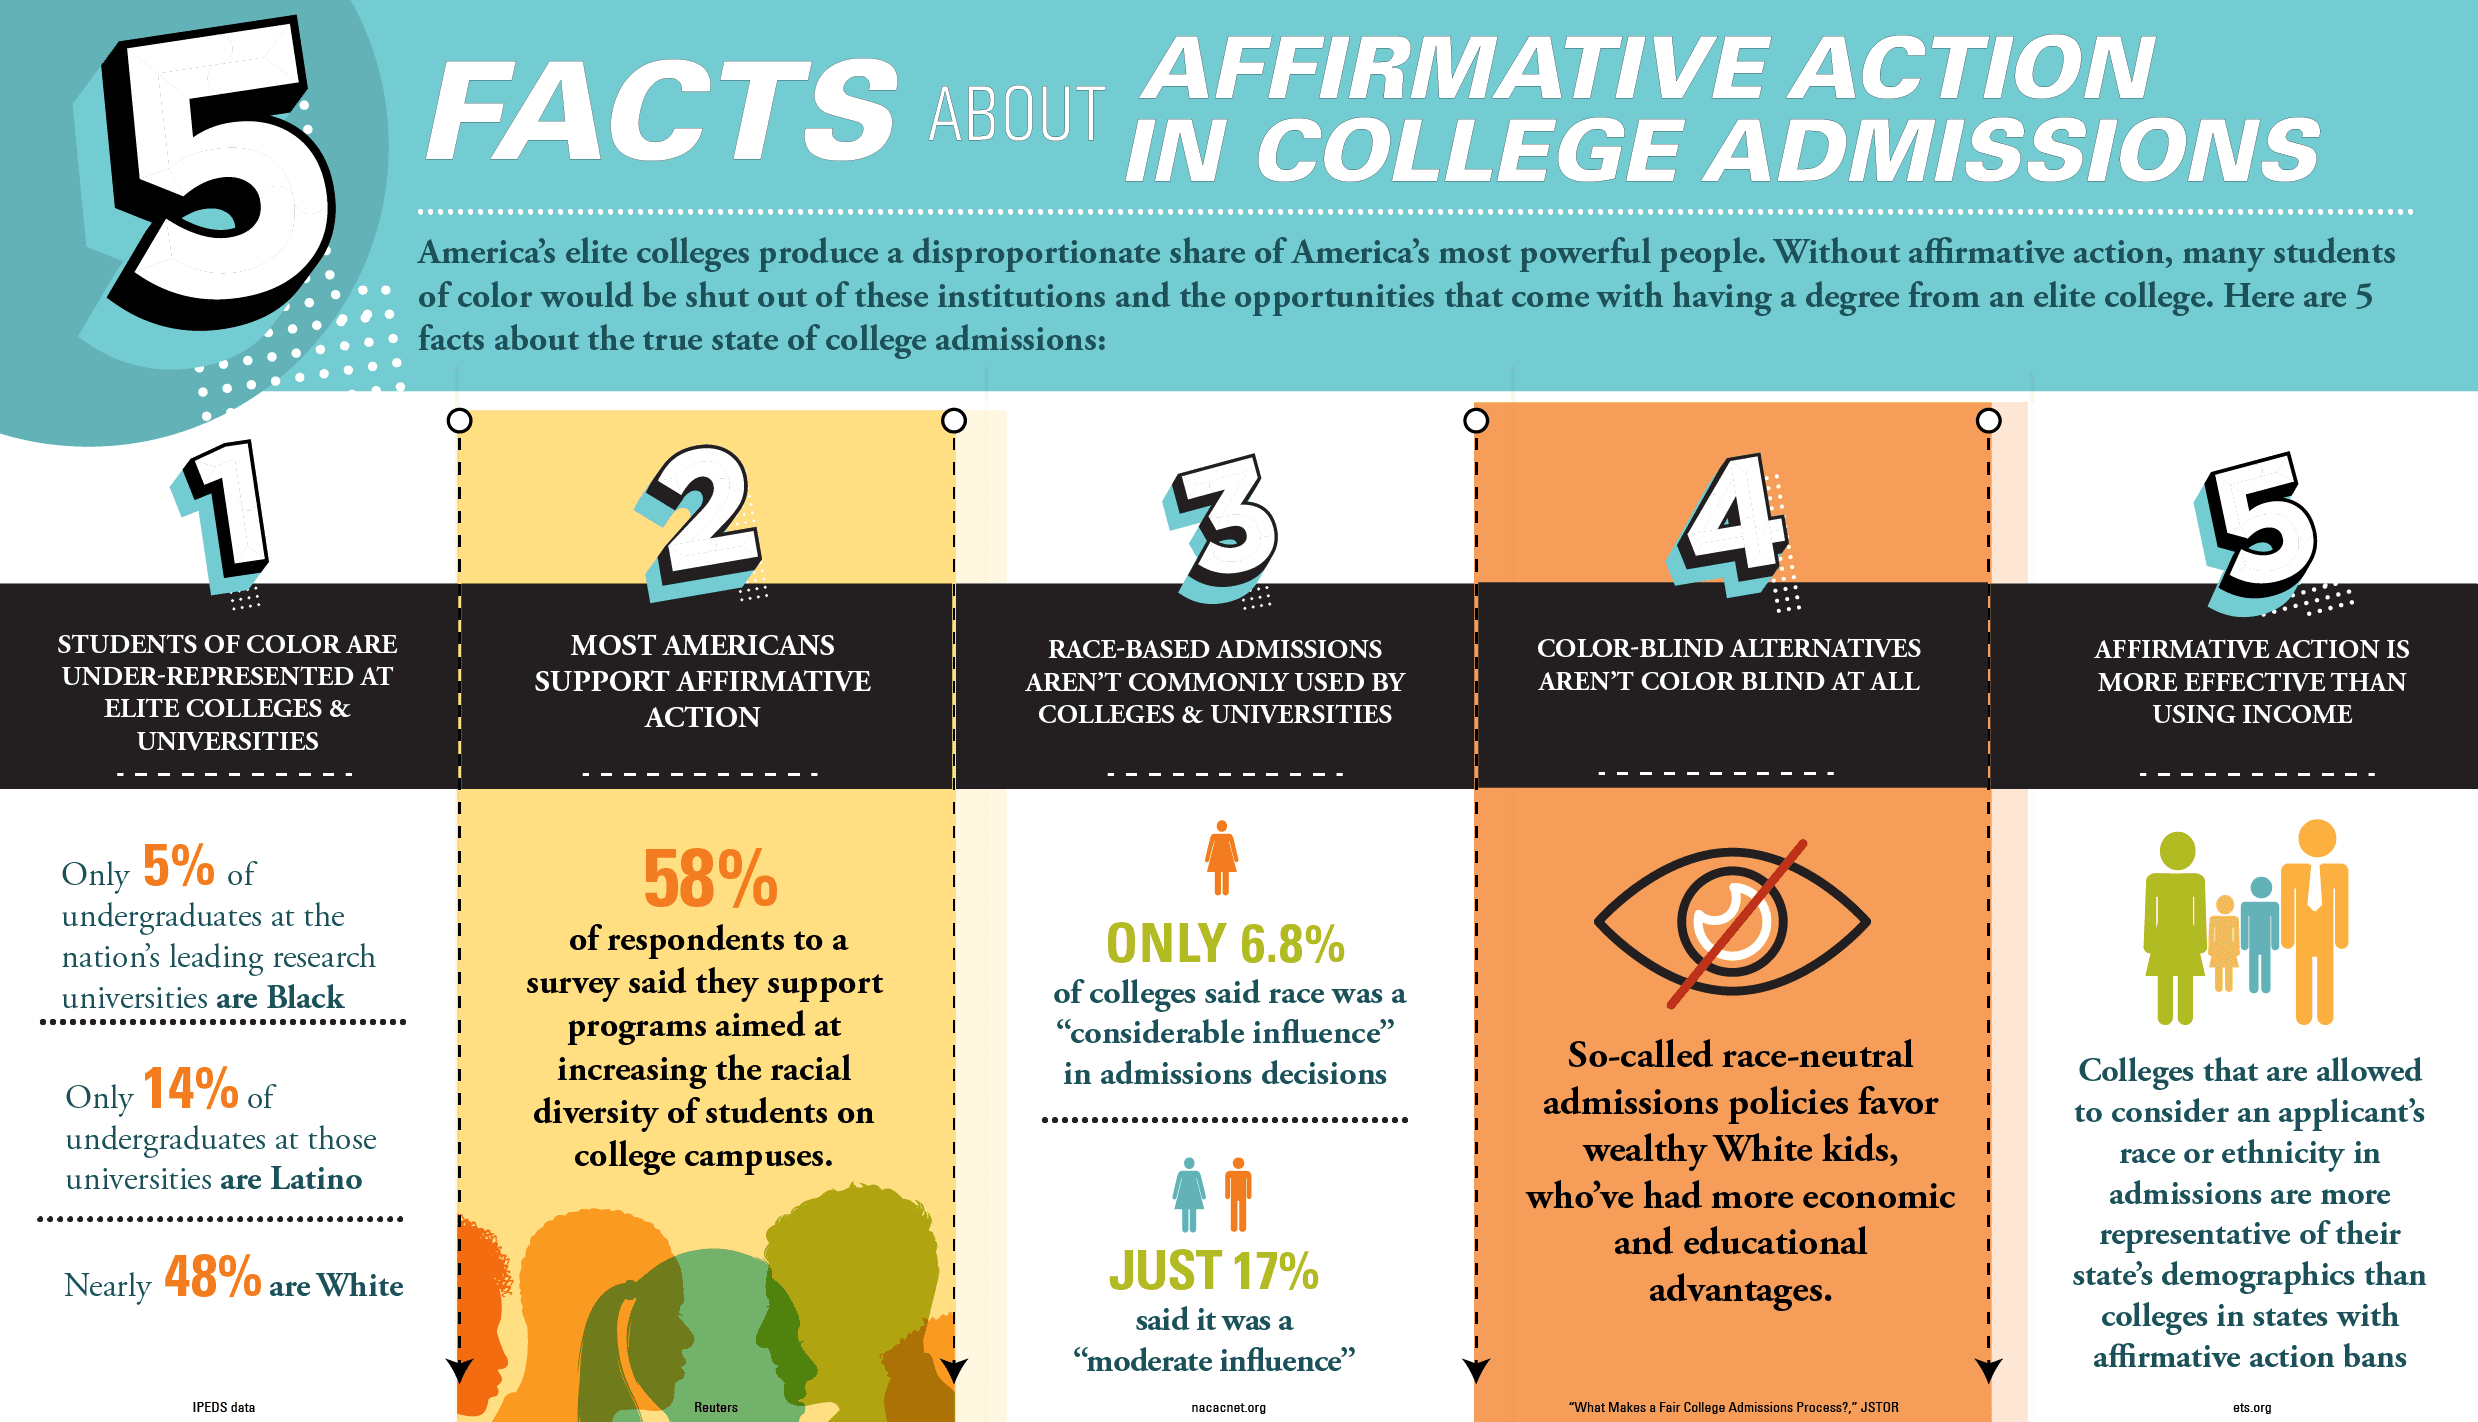 5 Facts about affirmative action in college admissions